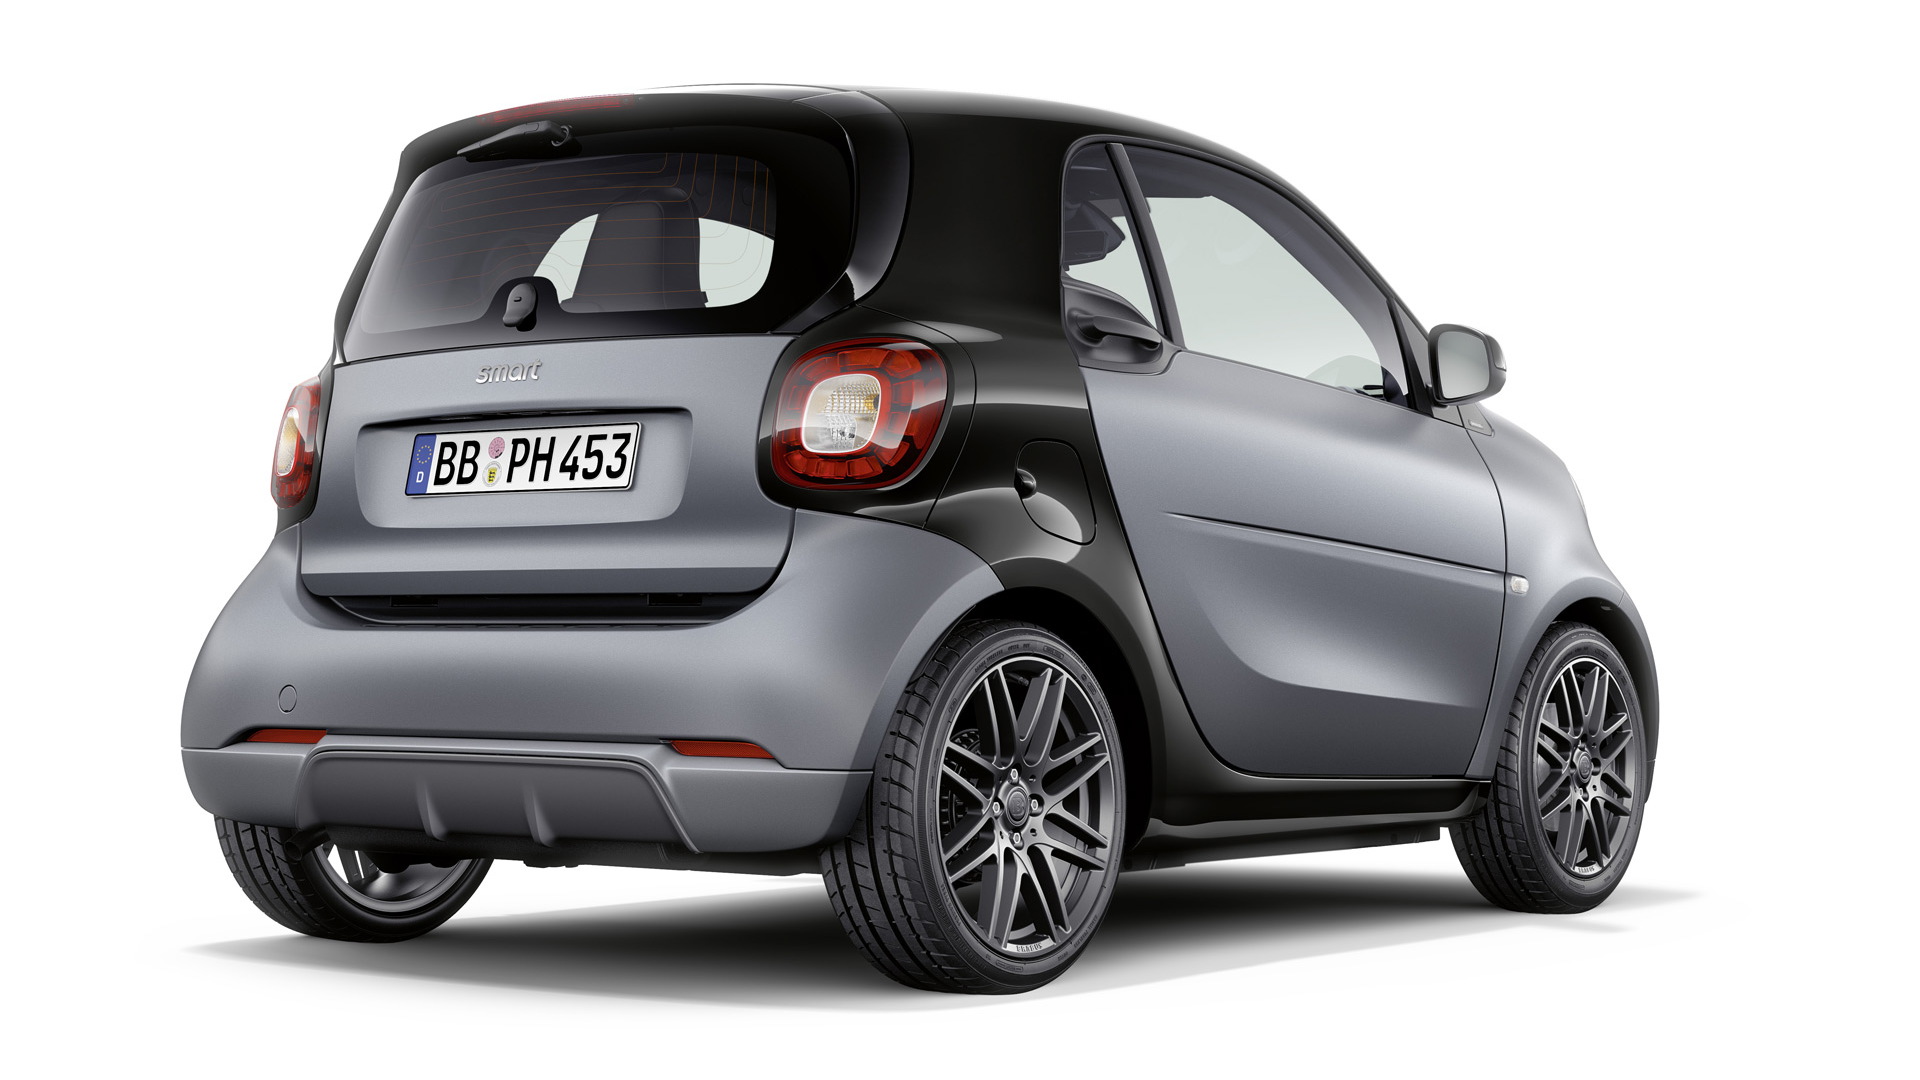 2017 Smart ForTwo equipped with Brabus Sports package